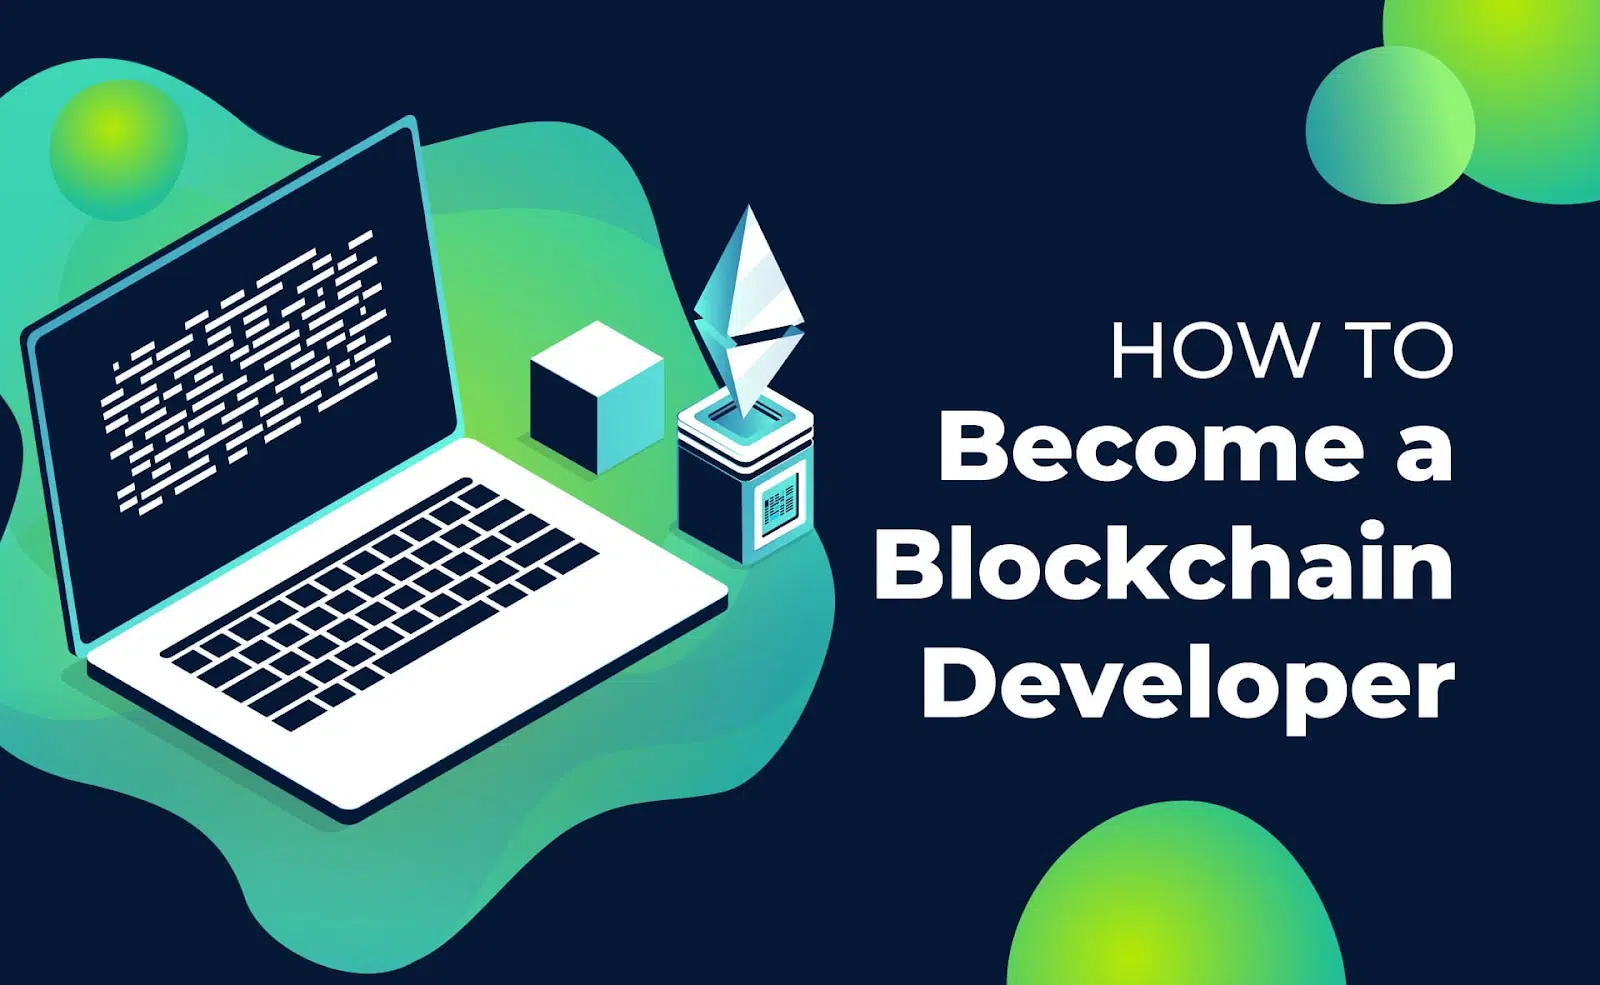 Key points to consider on your journey to becoming a blockchain developer - Image source: Moralis